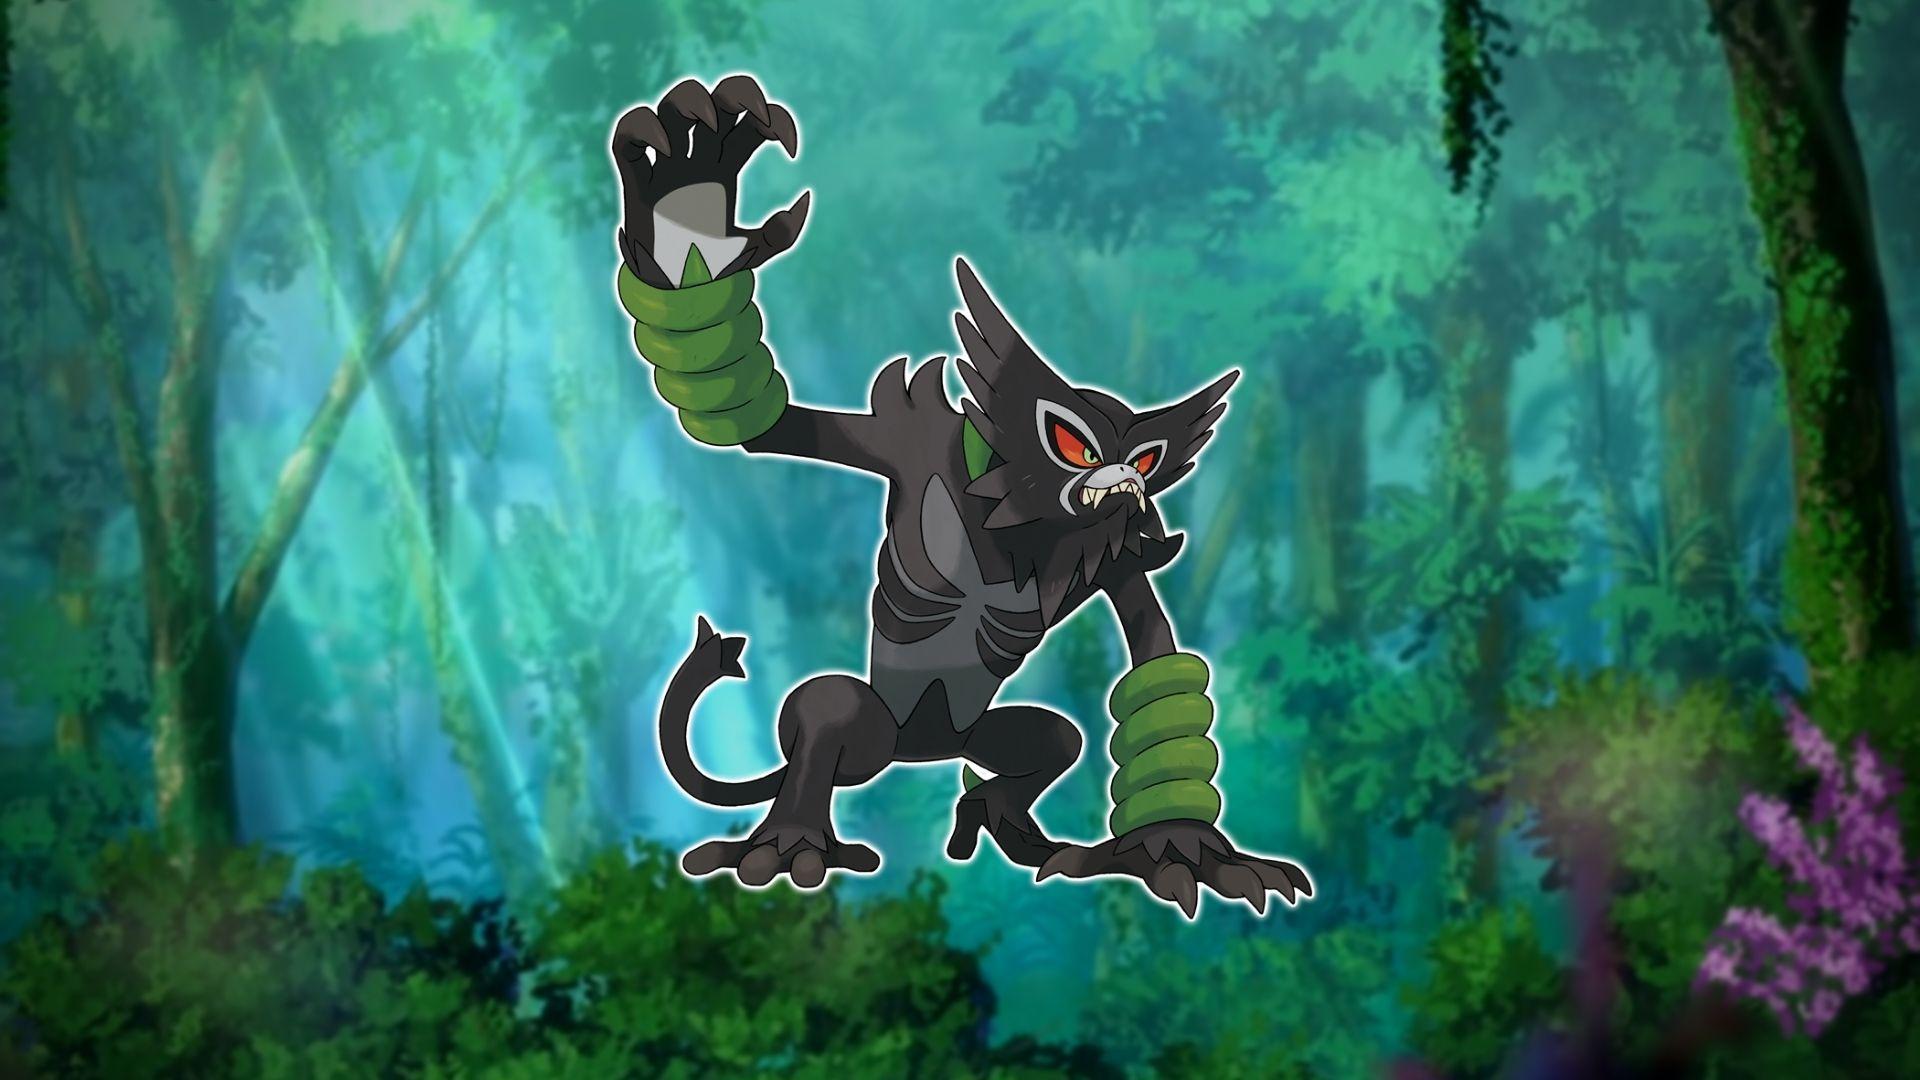 Pokémon Sword and Shield Zarude: Everything we know about the Mythical  Pokémon, including ability Leaf Guard, explained